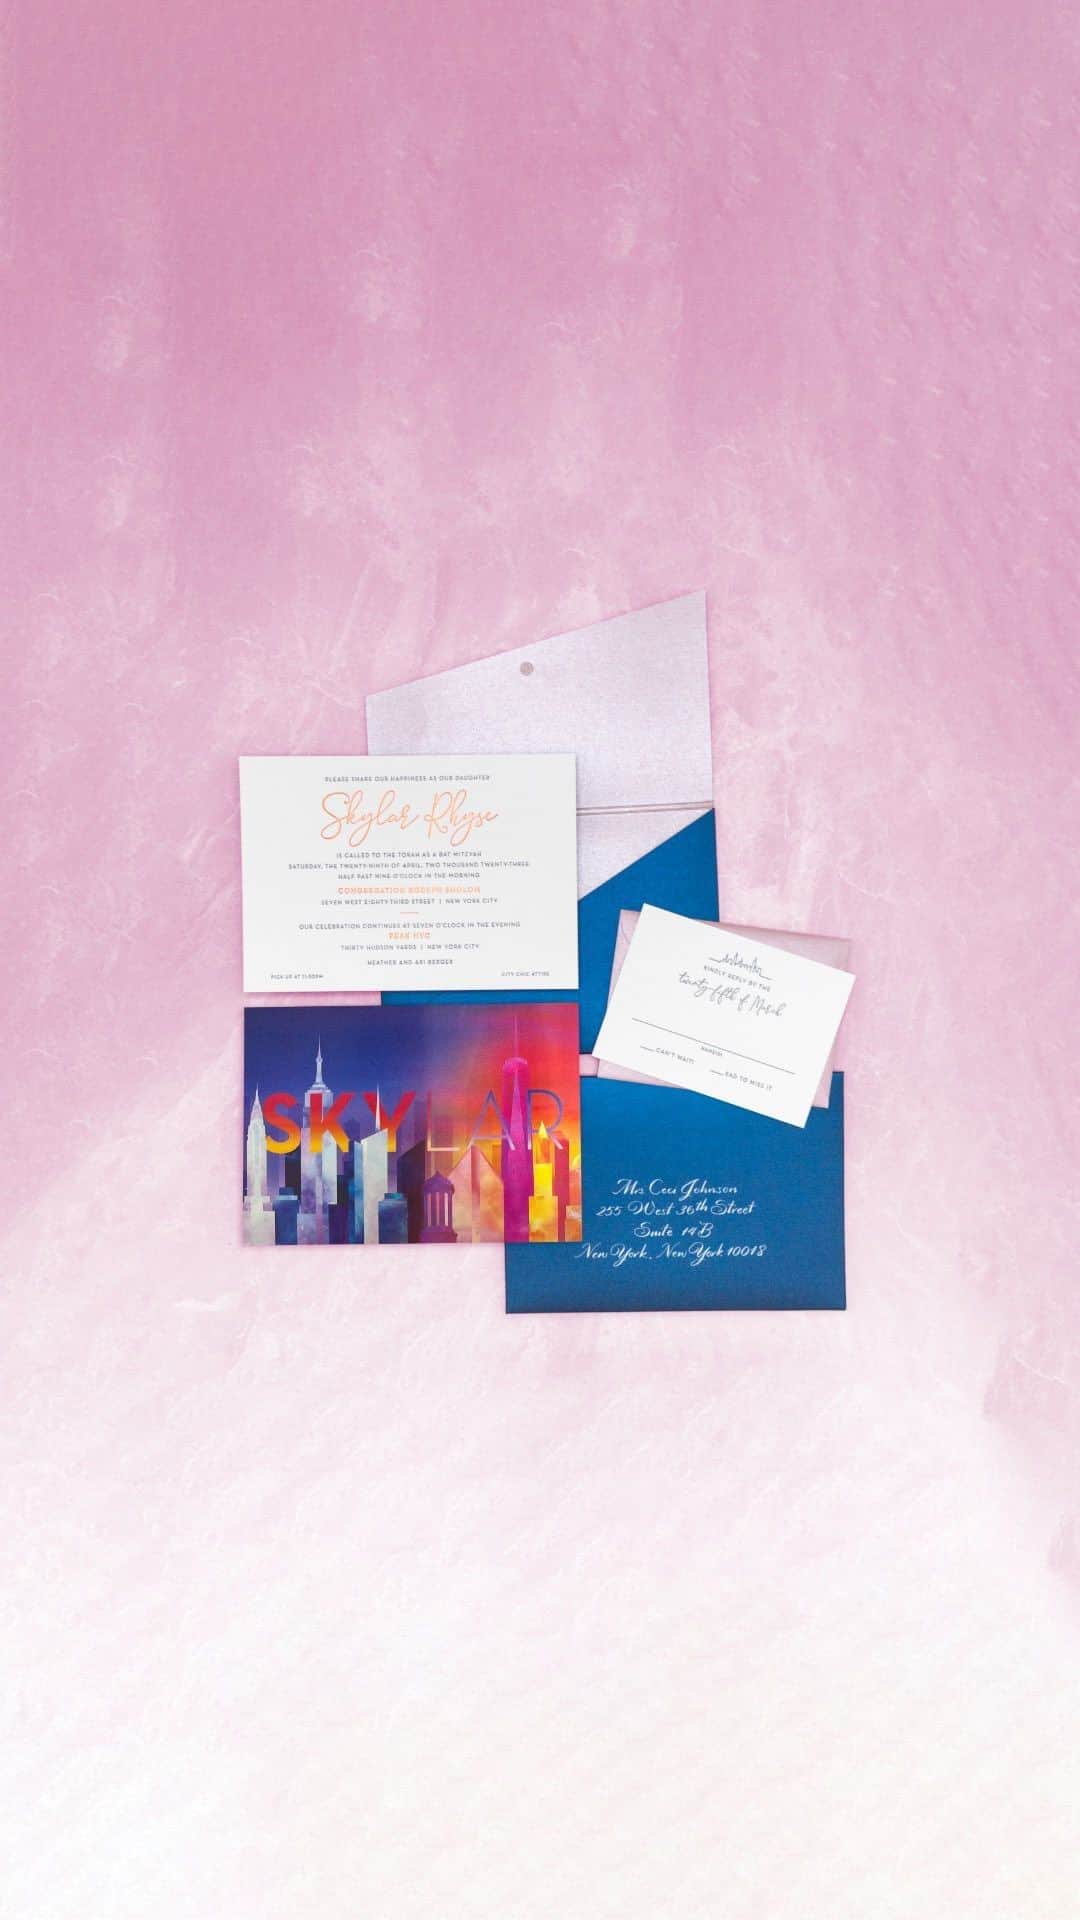 Ceci Johnsonのインスタグラム：「The invitation that set the tone for “SKY”lar’s Bat Mitzvah at @PeakHudsonYards this past weekend. 🌇 ✨  The card flashes between a warm, vibrant sunset into a cool night-time view of the iconic Manhattan skyline. Inspired by what the guest was to experience: arriving at the party with a welcoming sunset view to ending the evening with the midnight sky and sparkling cityscape above them. 🧡 💙   Follow @CeciNewYork for more design inspiration to #BeautifyYourWorld and @VictoriaDubinEvents for extraordinary Weddings, Celebrations & Events.  Planning, Design, Production: @victoriadubinevents + @amandadubin Invitation Design + Event Branding: @cecinewyork Venue: @peakhudsonyards Catering:@rhchospitality Design: @dejuanstroud Entertainment, lighting, video content and production: @totalentertainmentnyc Favors + Swag: @etyshasha Cake: @rbicakes Photography: @michaeljurick Video: Ben Schwartz  #batmitzvah #batmitzvahinvitations #eventdesign #eventplanning #eventstyling #invitationdesign #custominvitations #stationerydesign #designerinvitations #luxuryinvitations #cecicouture #cecinewyork #victoriadubinevents」